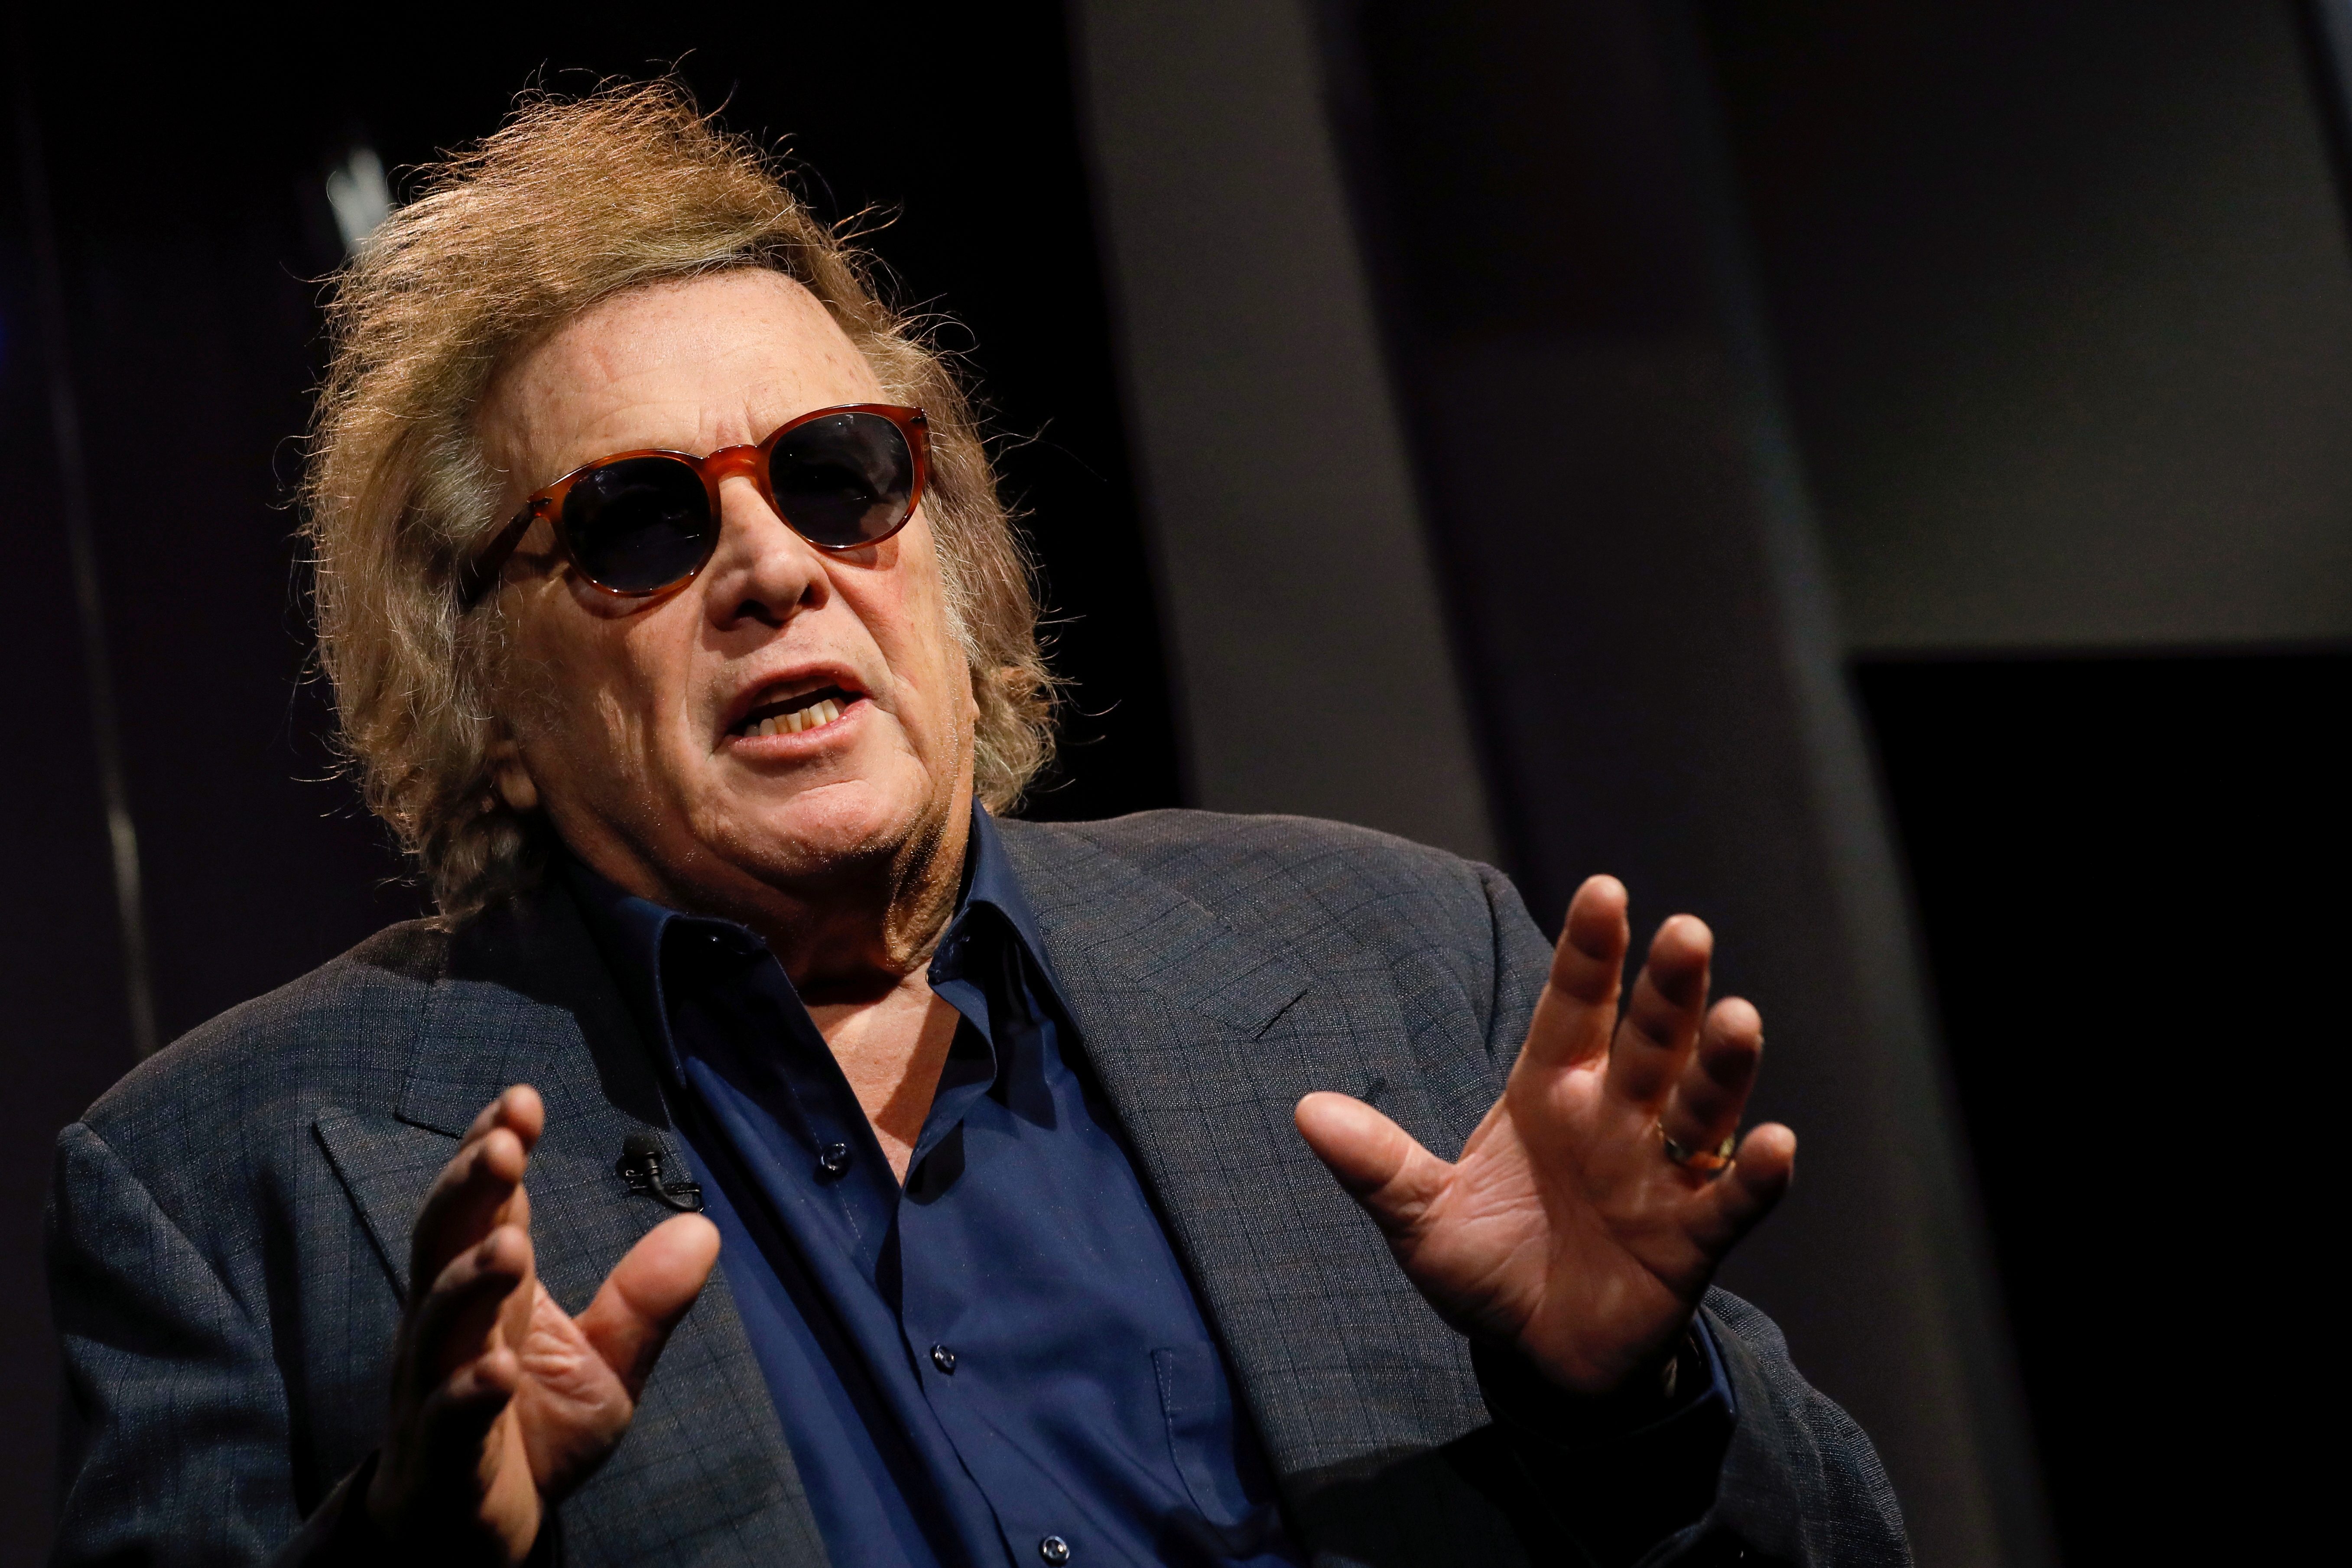 Don McLean gets Hollywood star as 'American Pie' hits 50